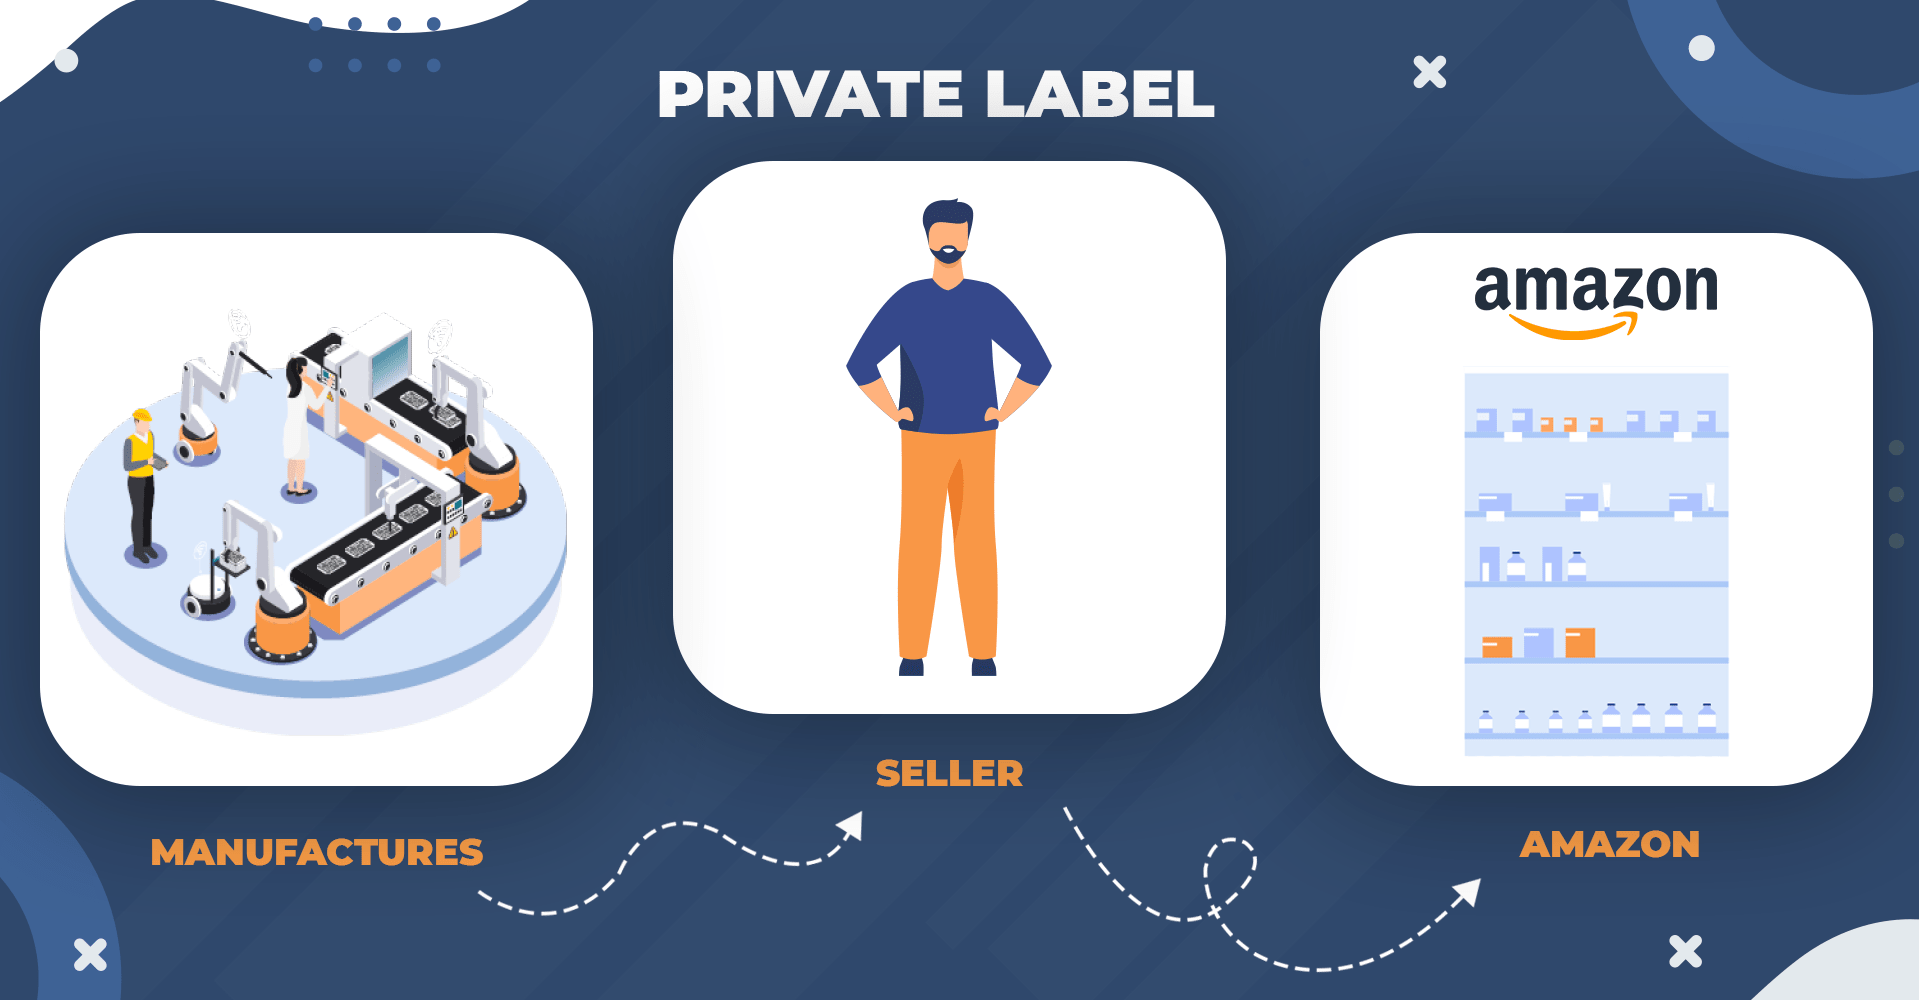 Guide for Amazon sourcing for Private Label